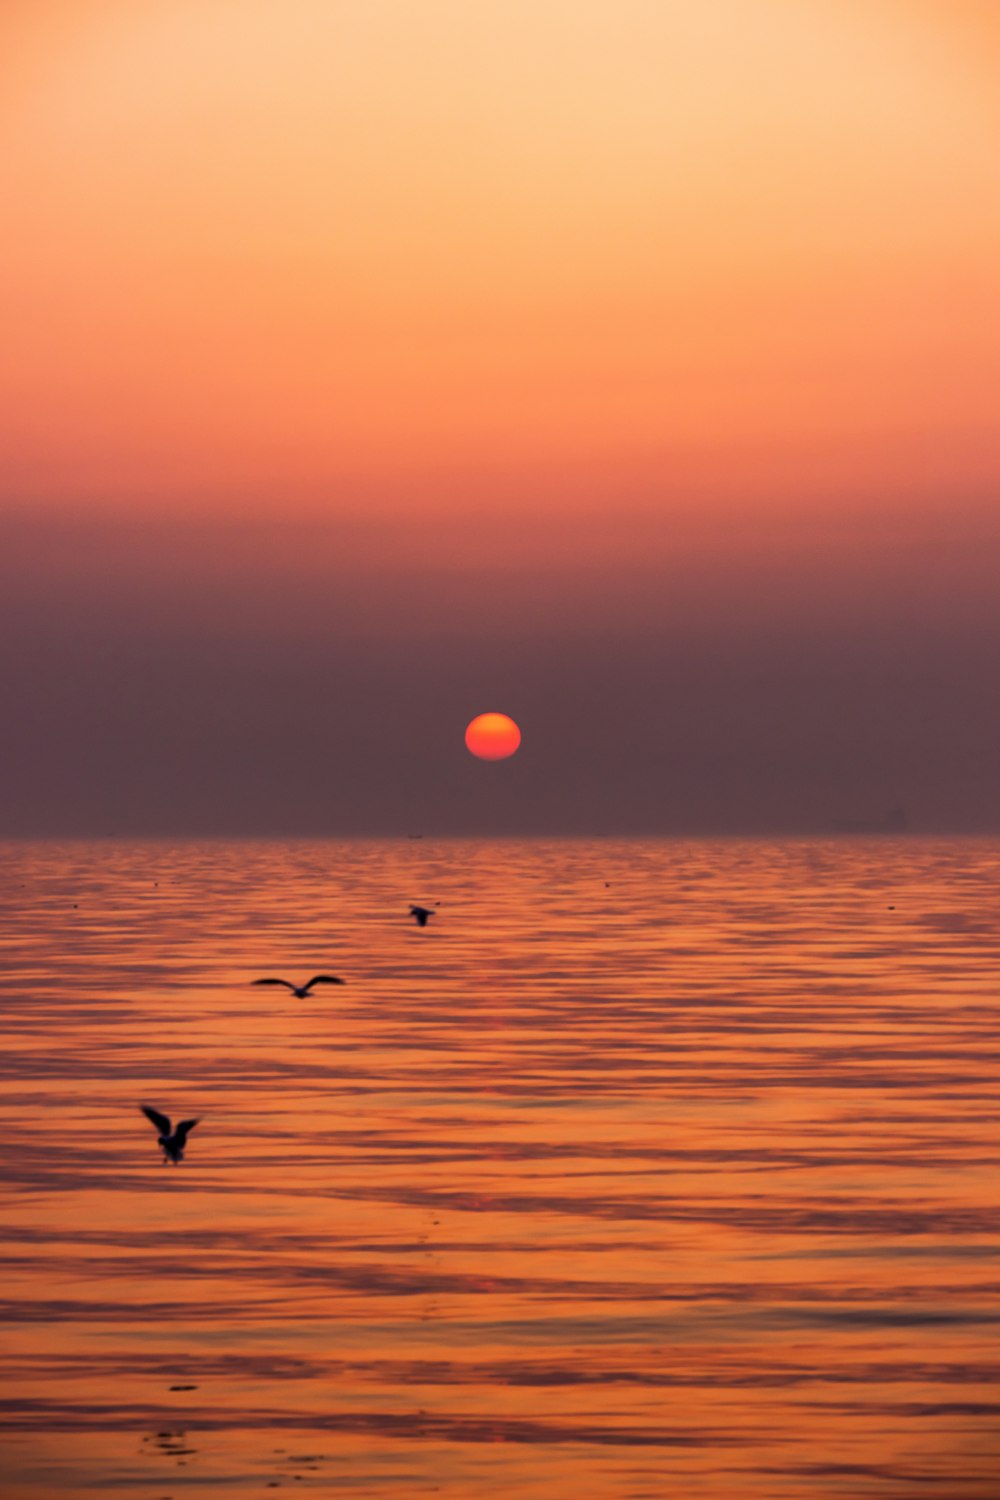 a sunset over the ocean with birds flying in the air